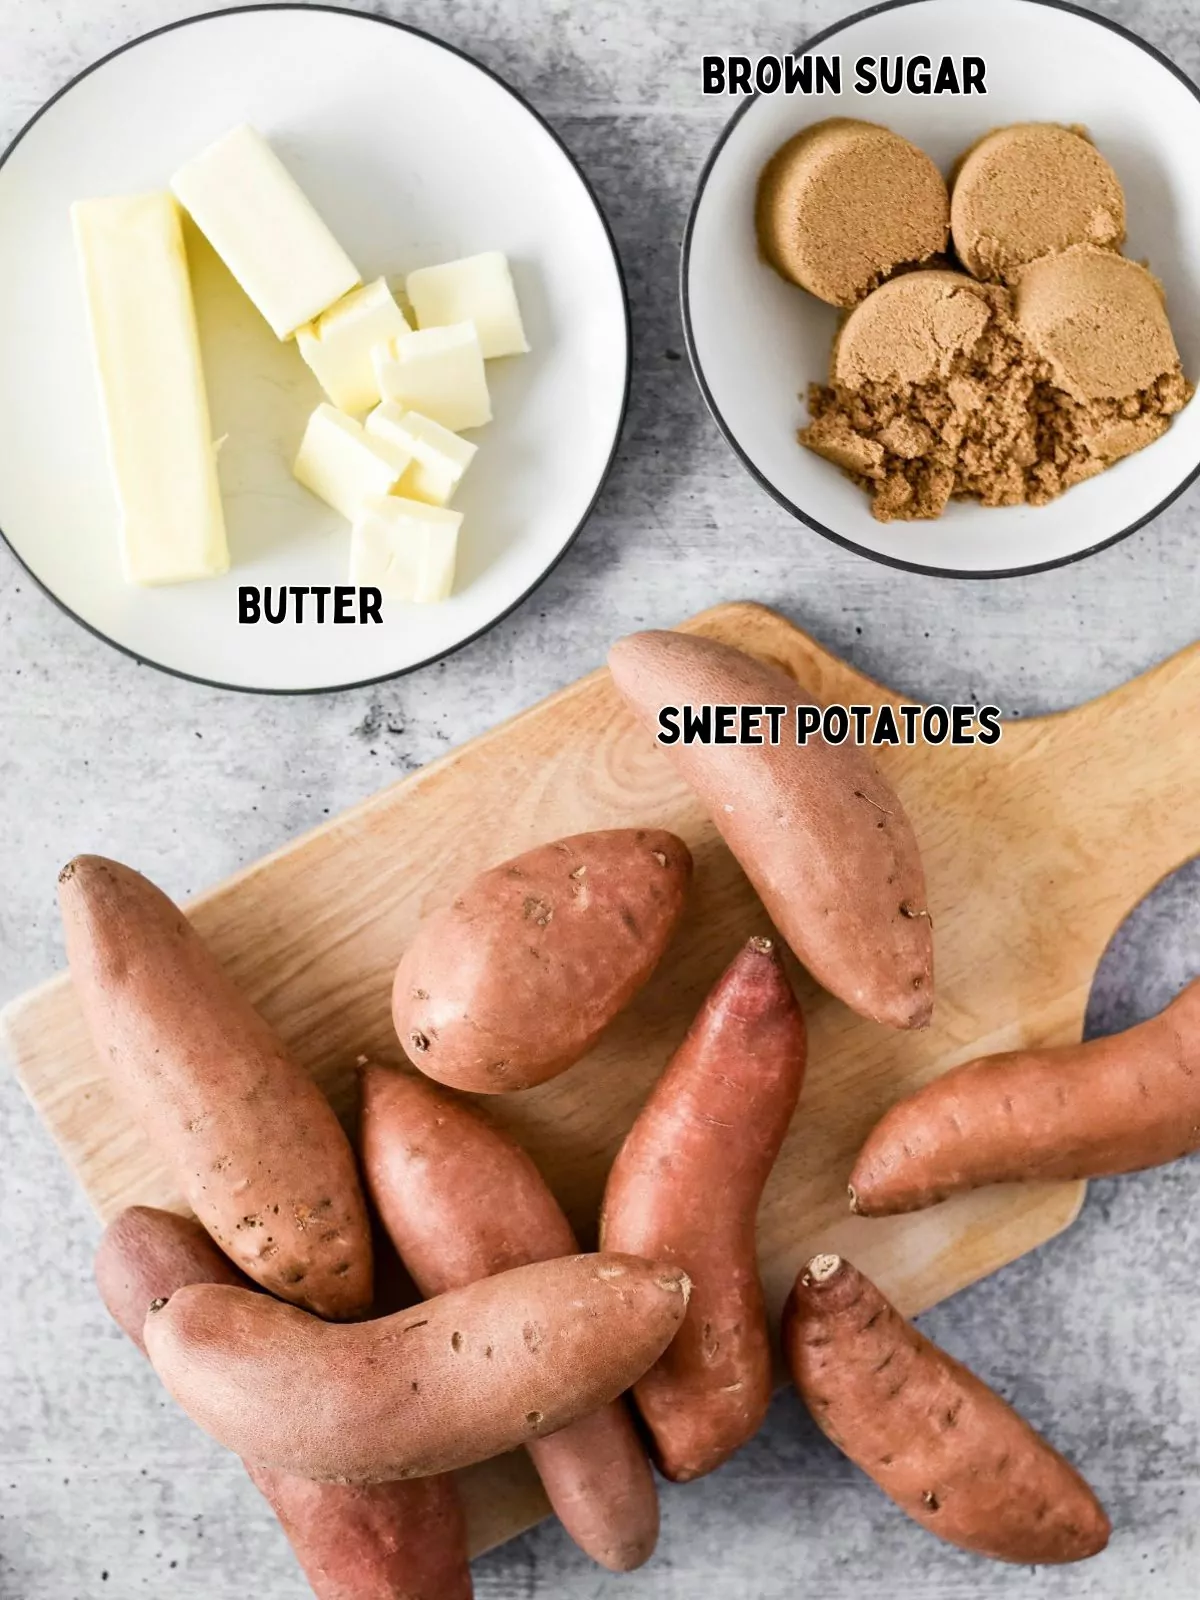 Ingredients for thanksgiving candied sweet potatoes recipe.